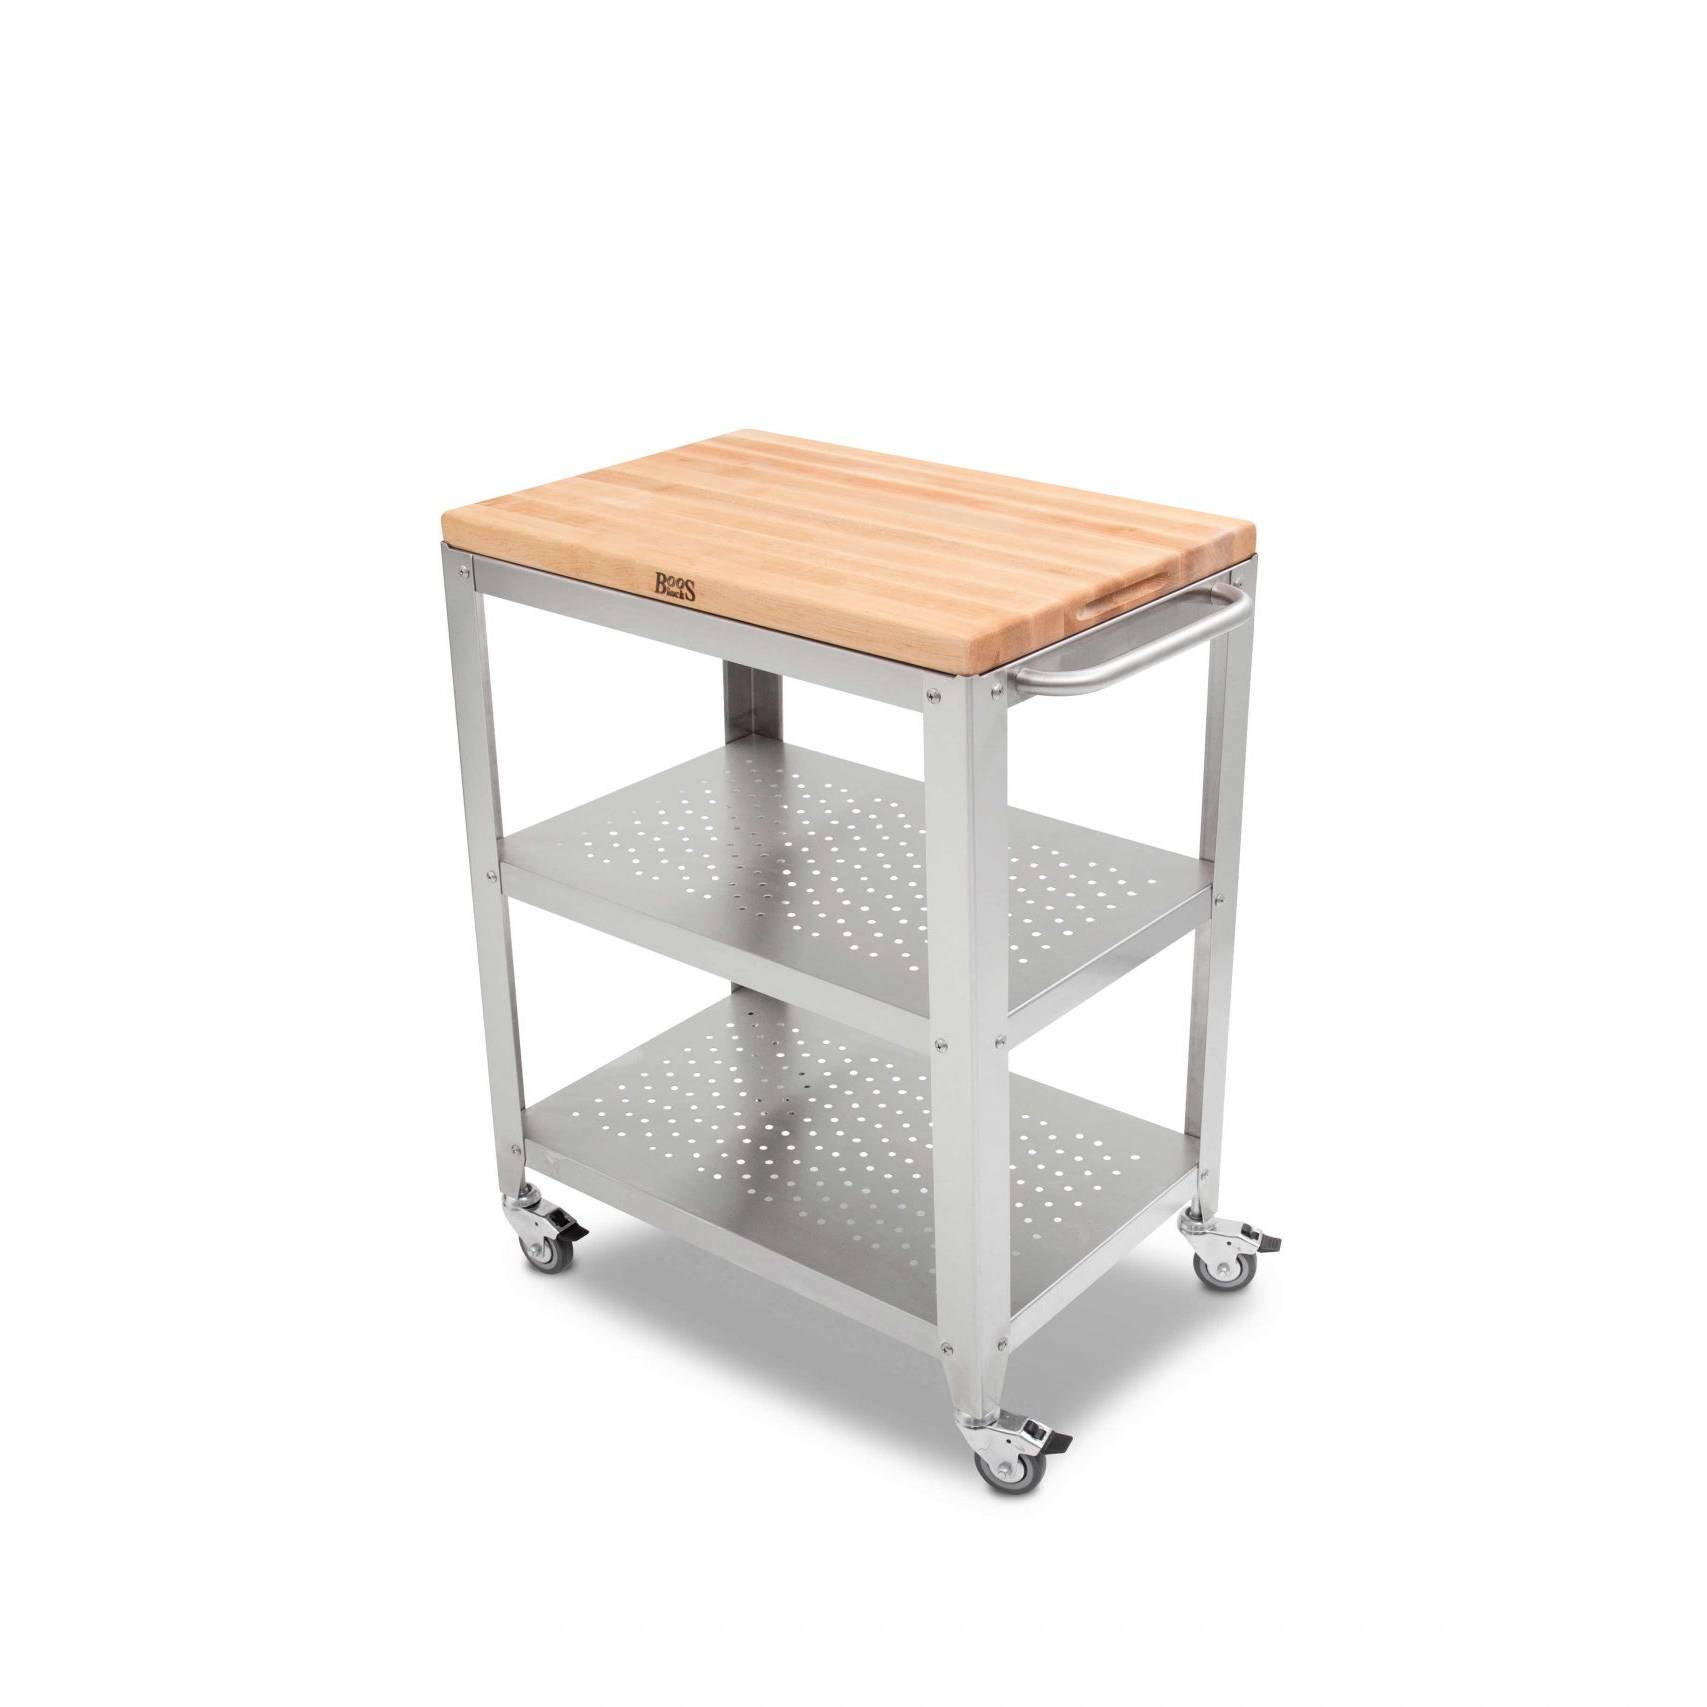 Culinarte Kitchen &amp; Serving Cart with removable hard maple long wood cutting board; stainless steel base with drawer and 2 shelves, towel rack; lockable casters 1